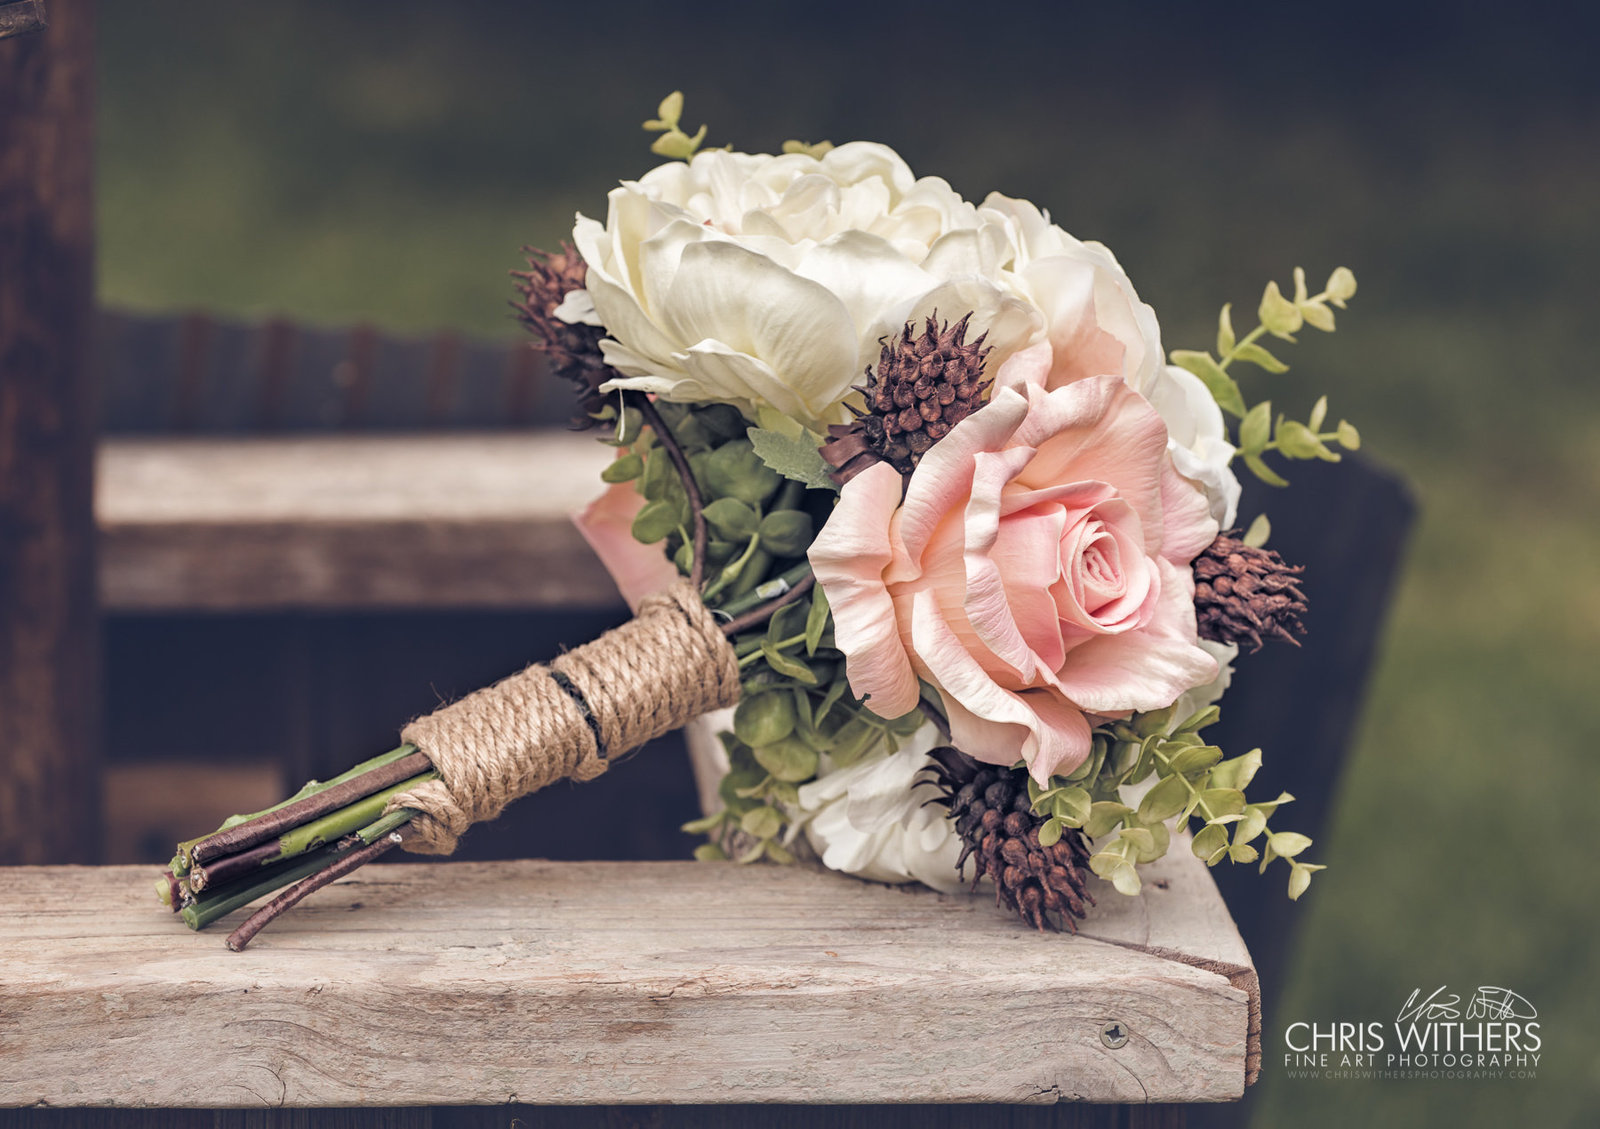 Springfield Illinois Wedding Photographer - Chris Withers Photography (42 of 159)